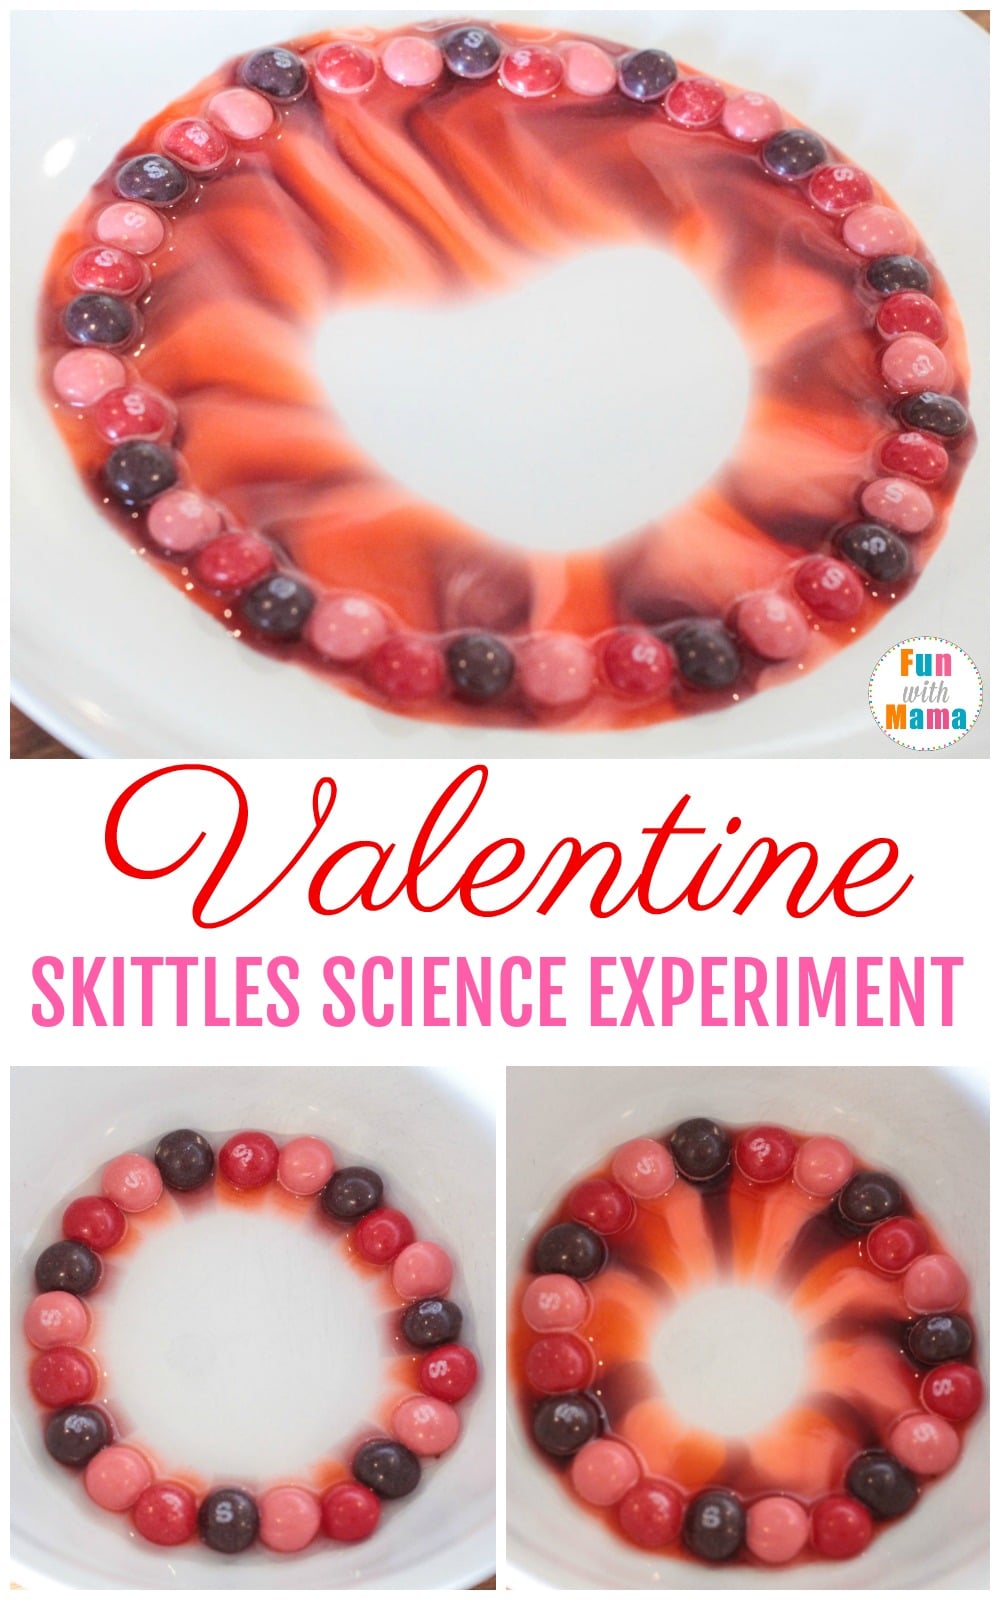 Dissolving skittles experiment for kids - perfect candy science fair project